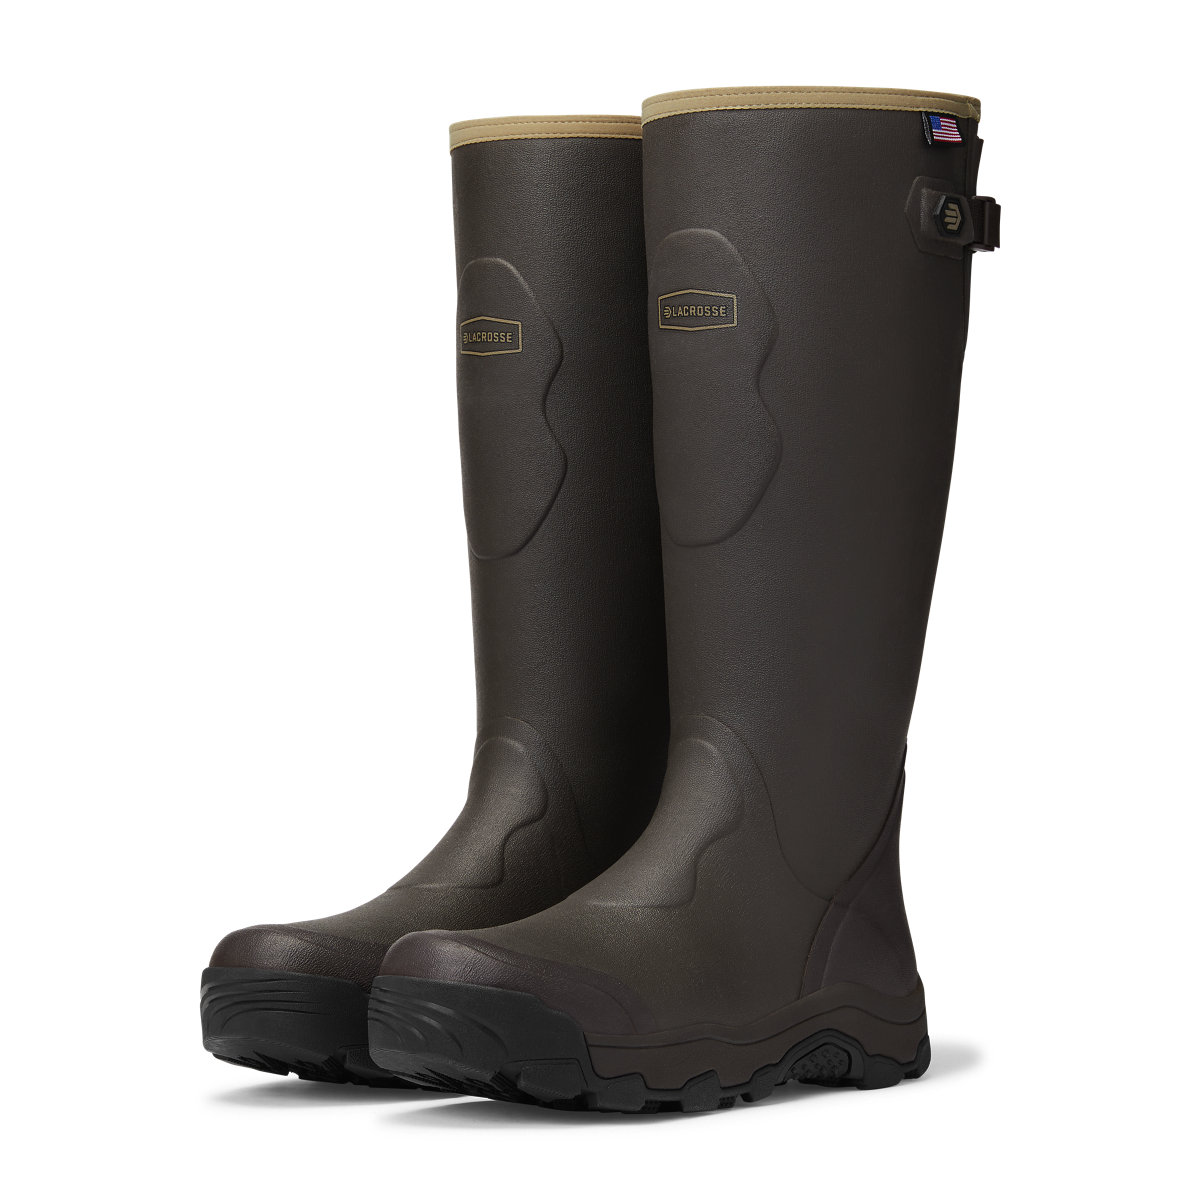 LaCrosse Footwear - Making superior rubber boots for hunting and work since  1897